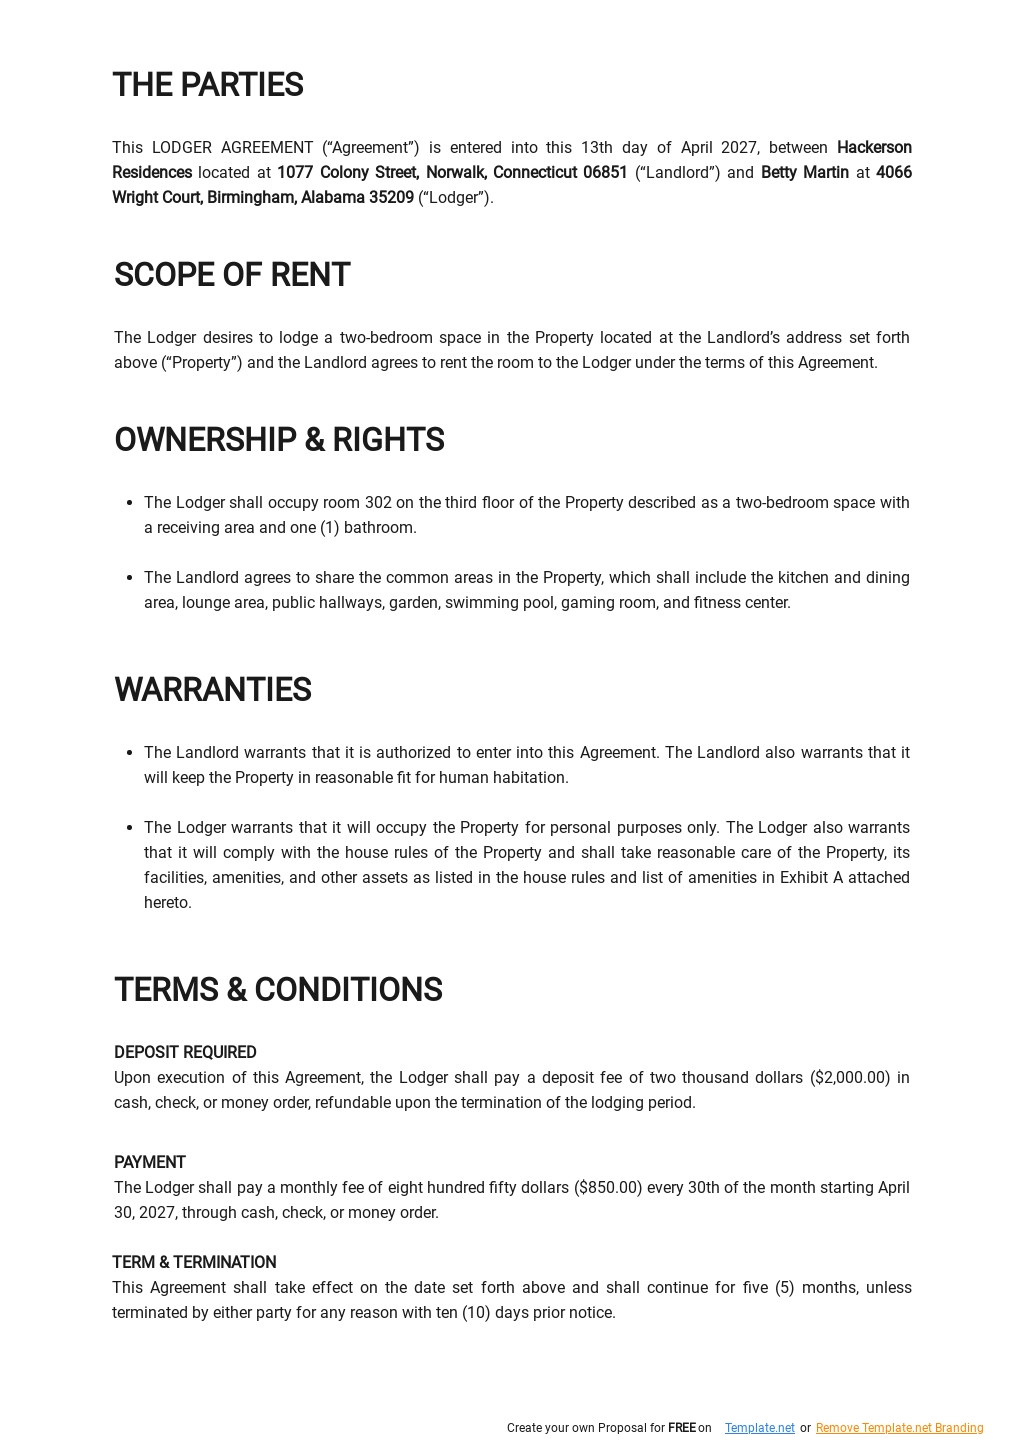 Free Basic Lodger Agreement Template - Google Docs, Word With Regard To termination of lodger agreement template